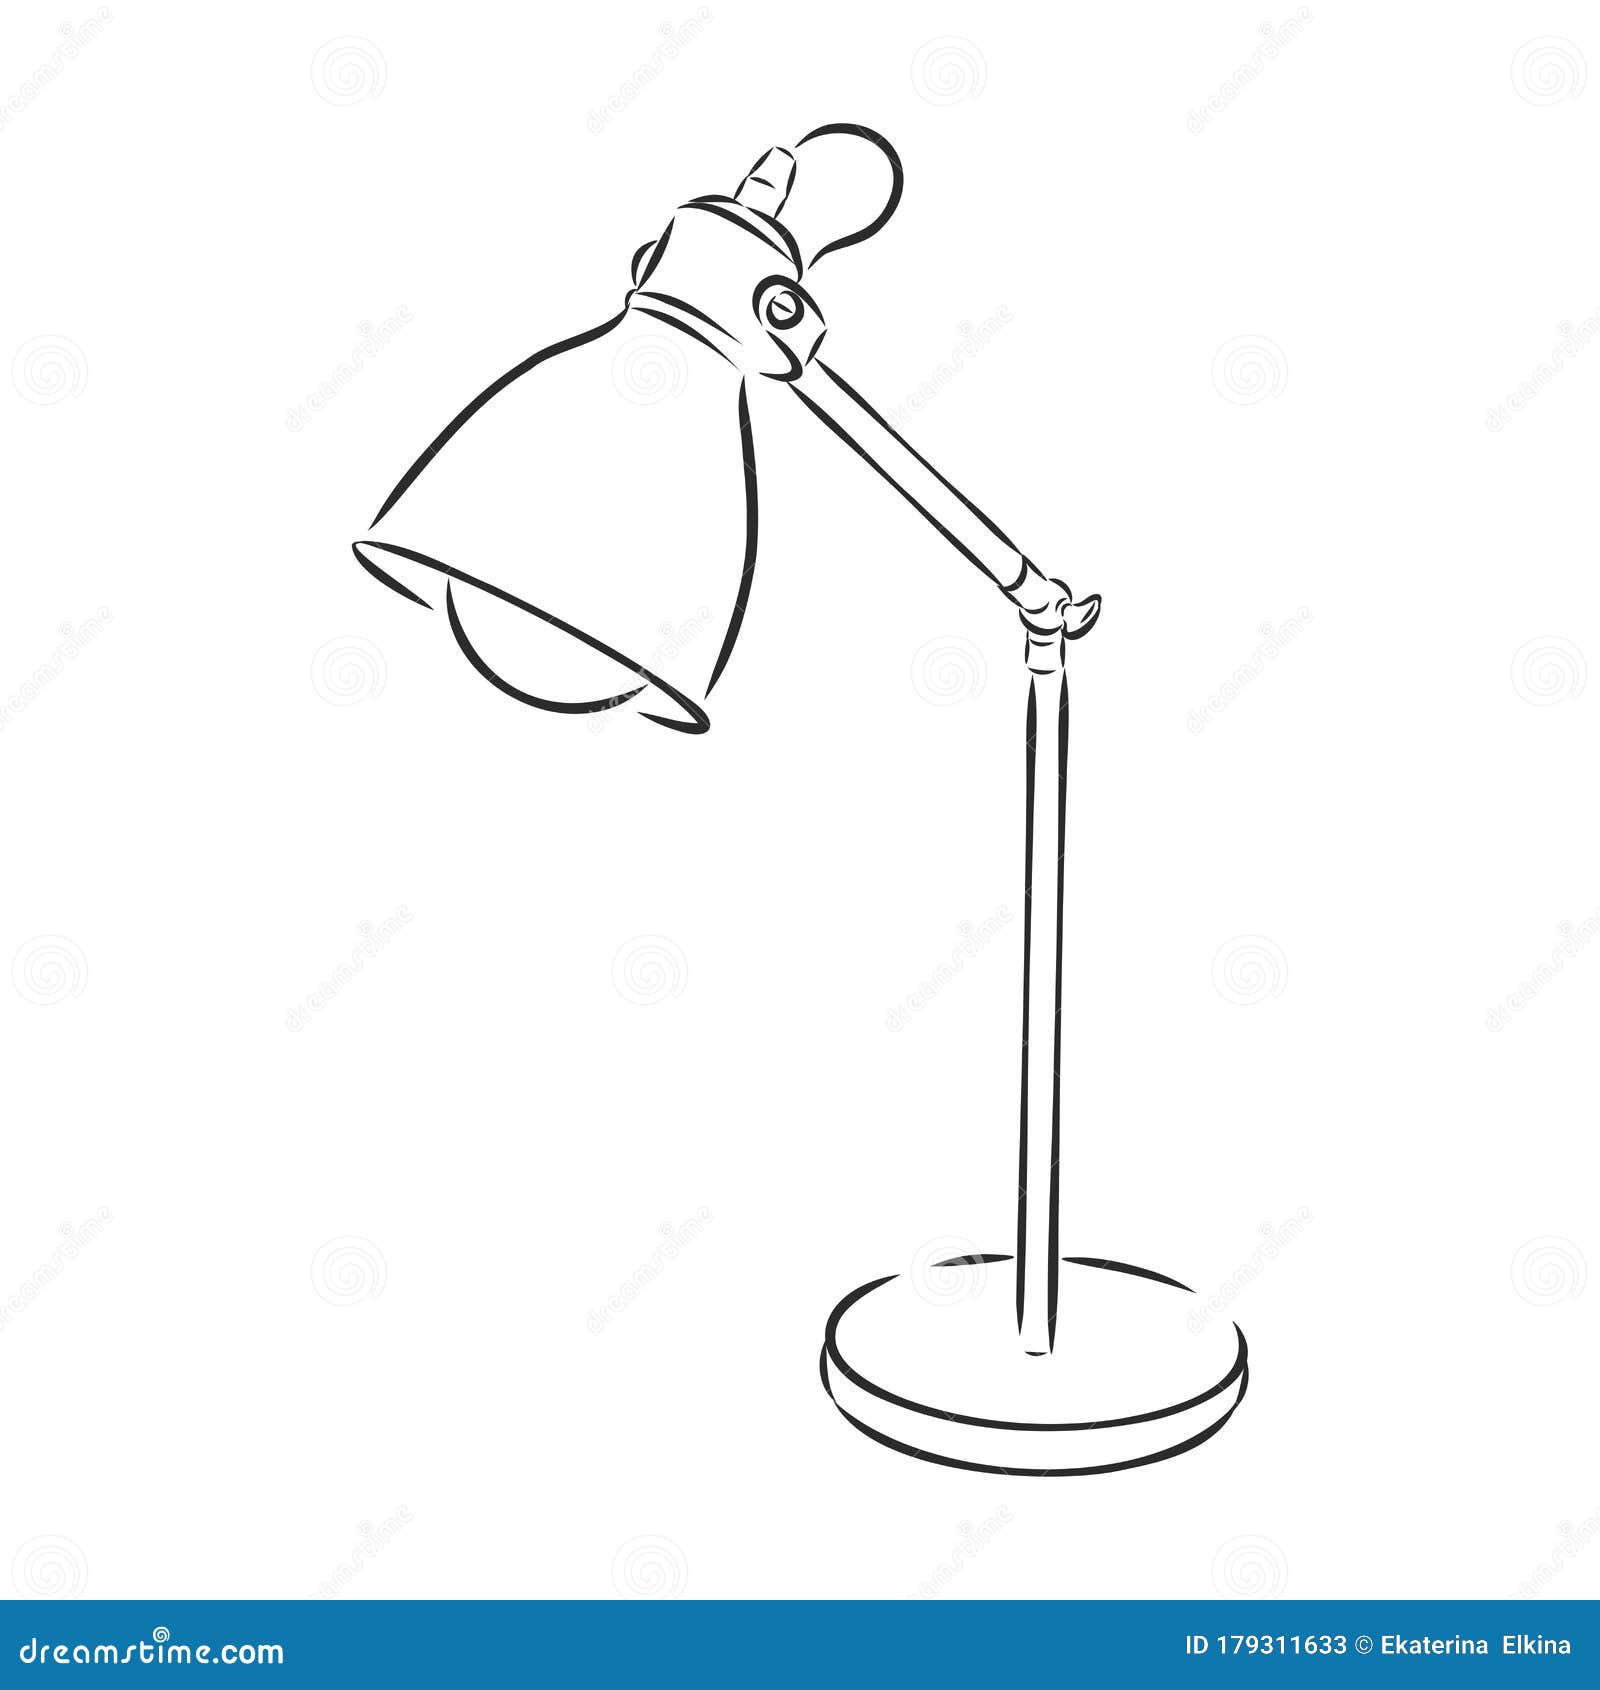 How to Draw a Lamp Step by Step with Free Lamp Printable - CraftyThinking